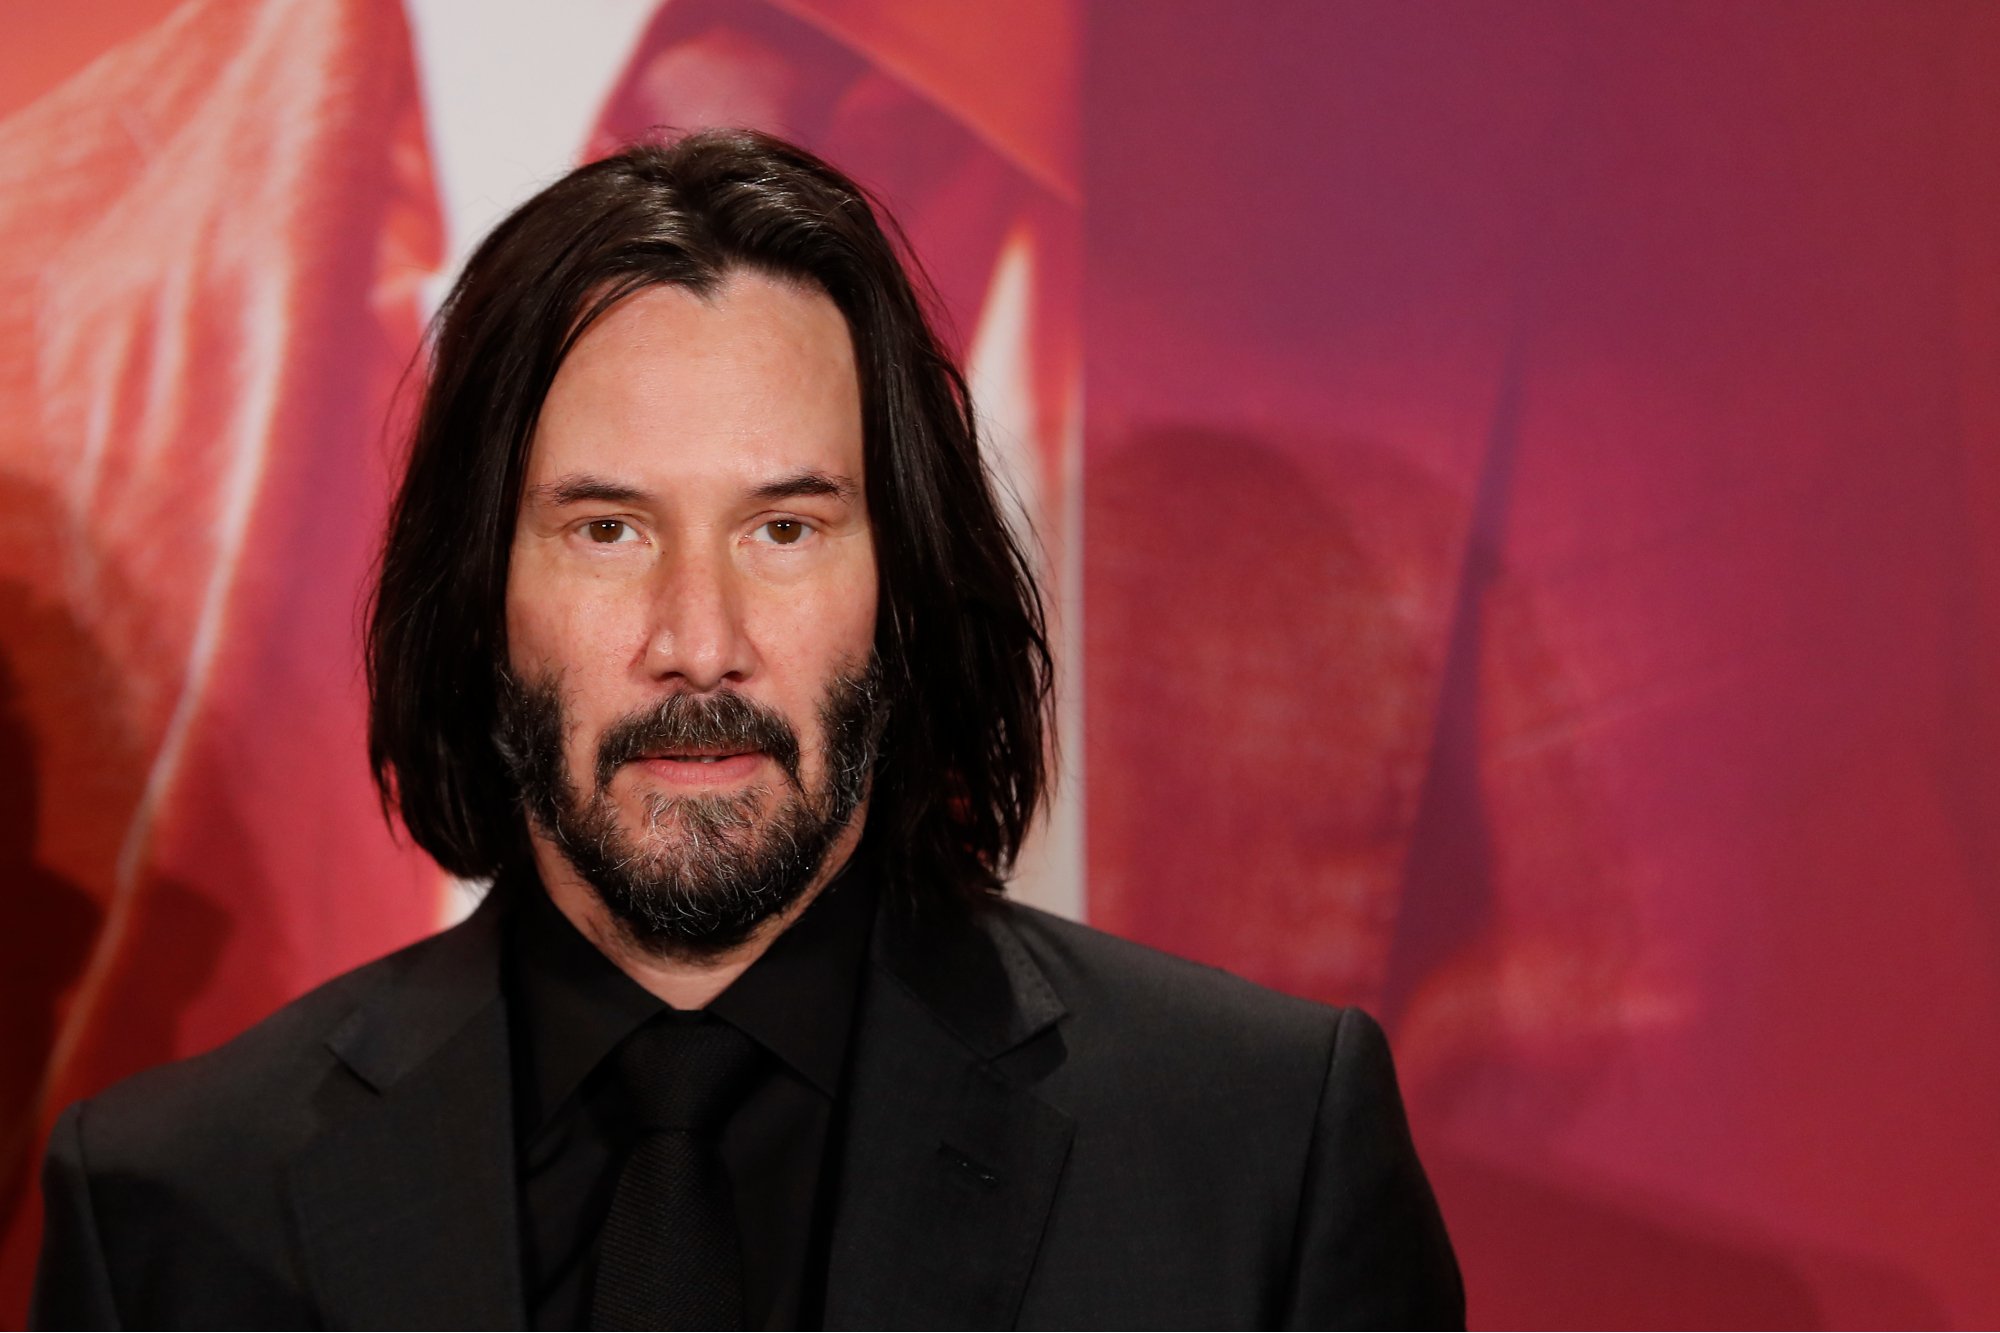 'John Wick 4' star Keanu Reeves wearing a black suit at the 'John Wick Chapter 3' photocall